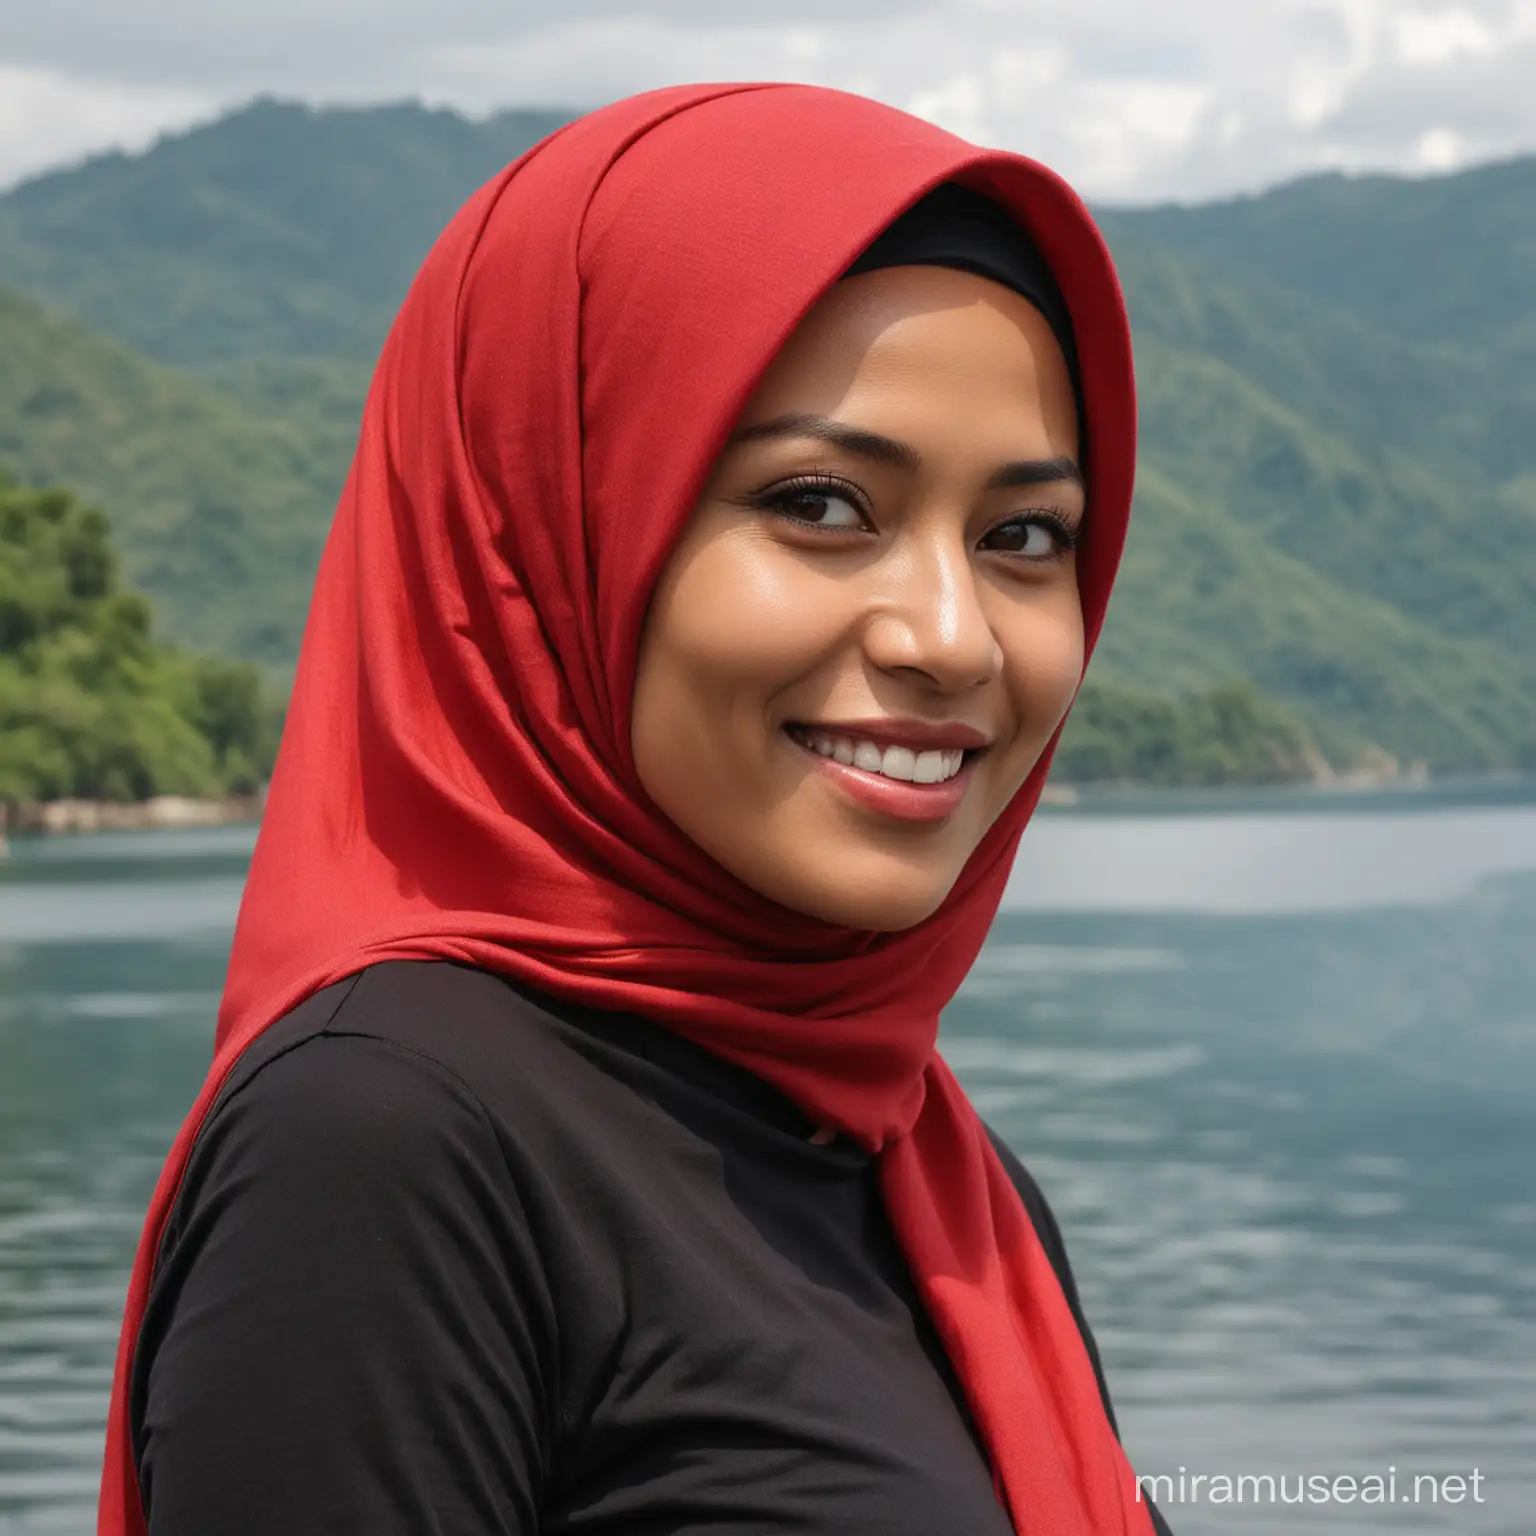 Elegant Indonesian Woman Smiling by Lake Toba in Tetrahedron Colors